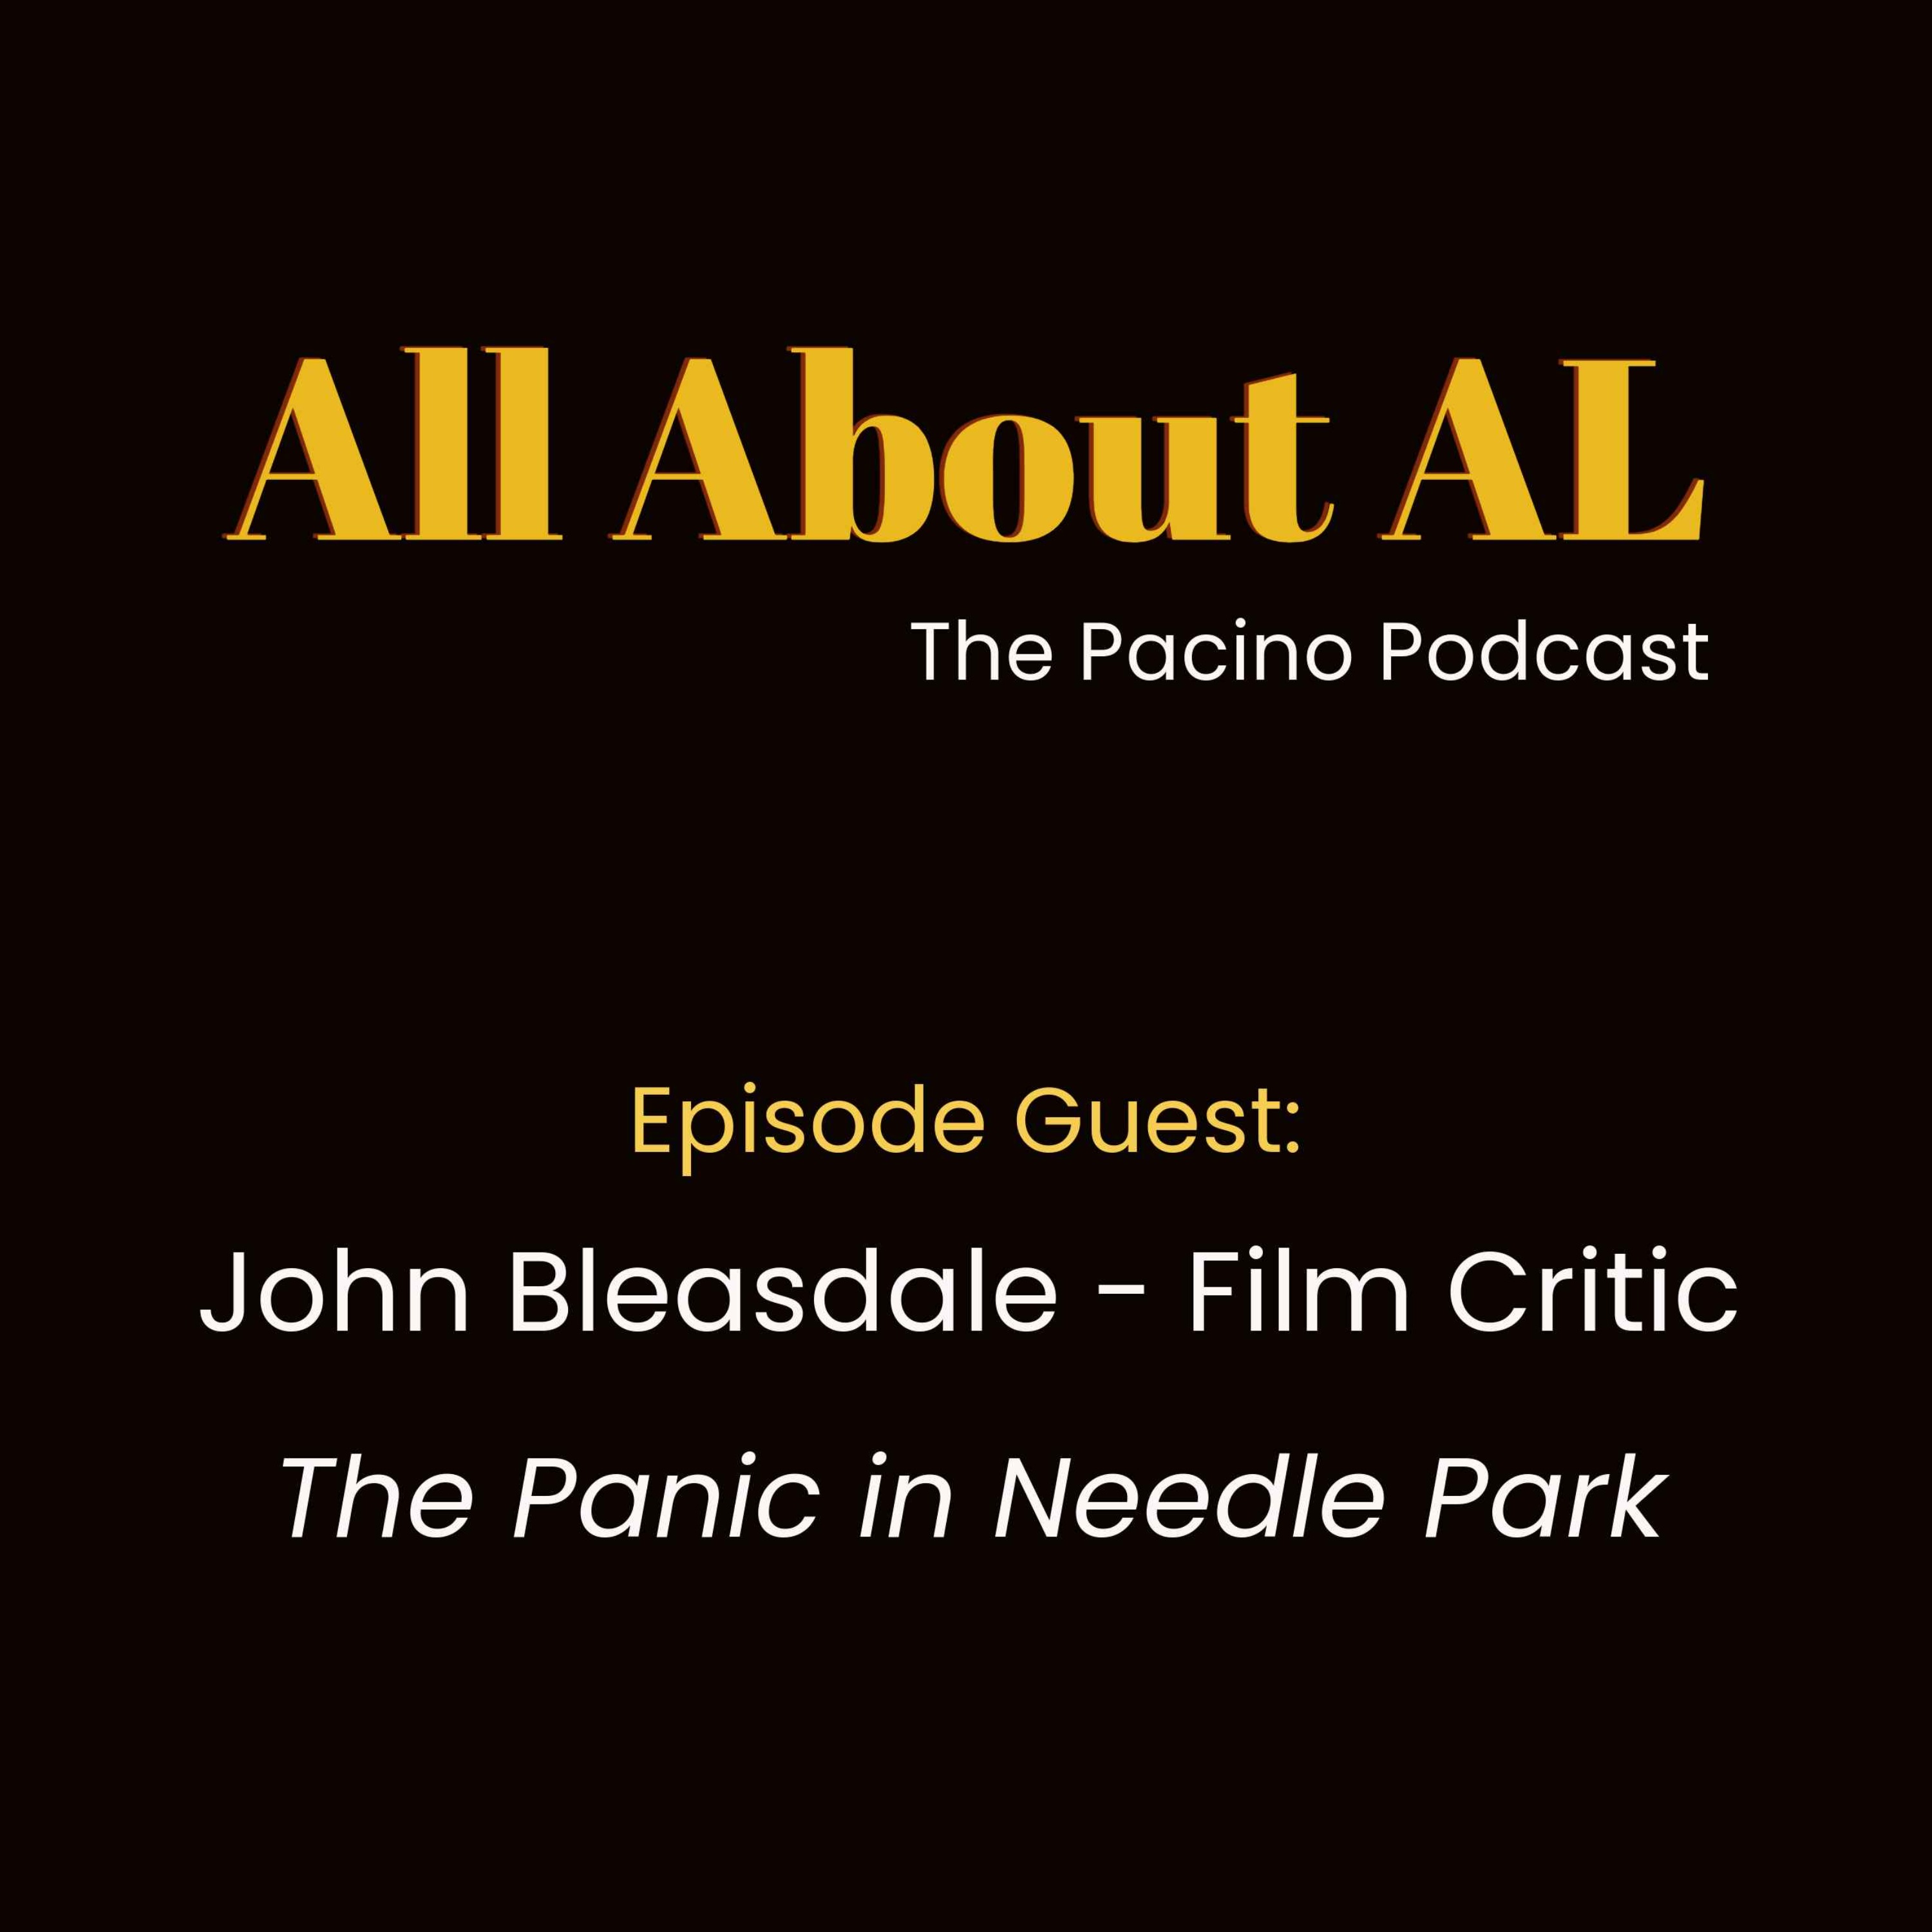 Episode 20: The Panic in Needle Park with John Bleasdale